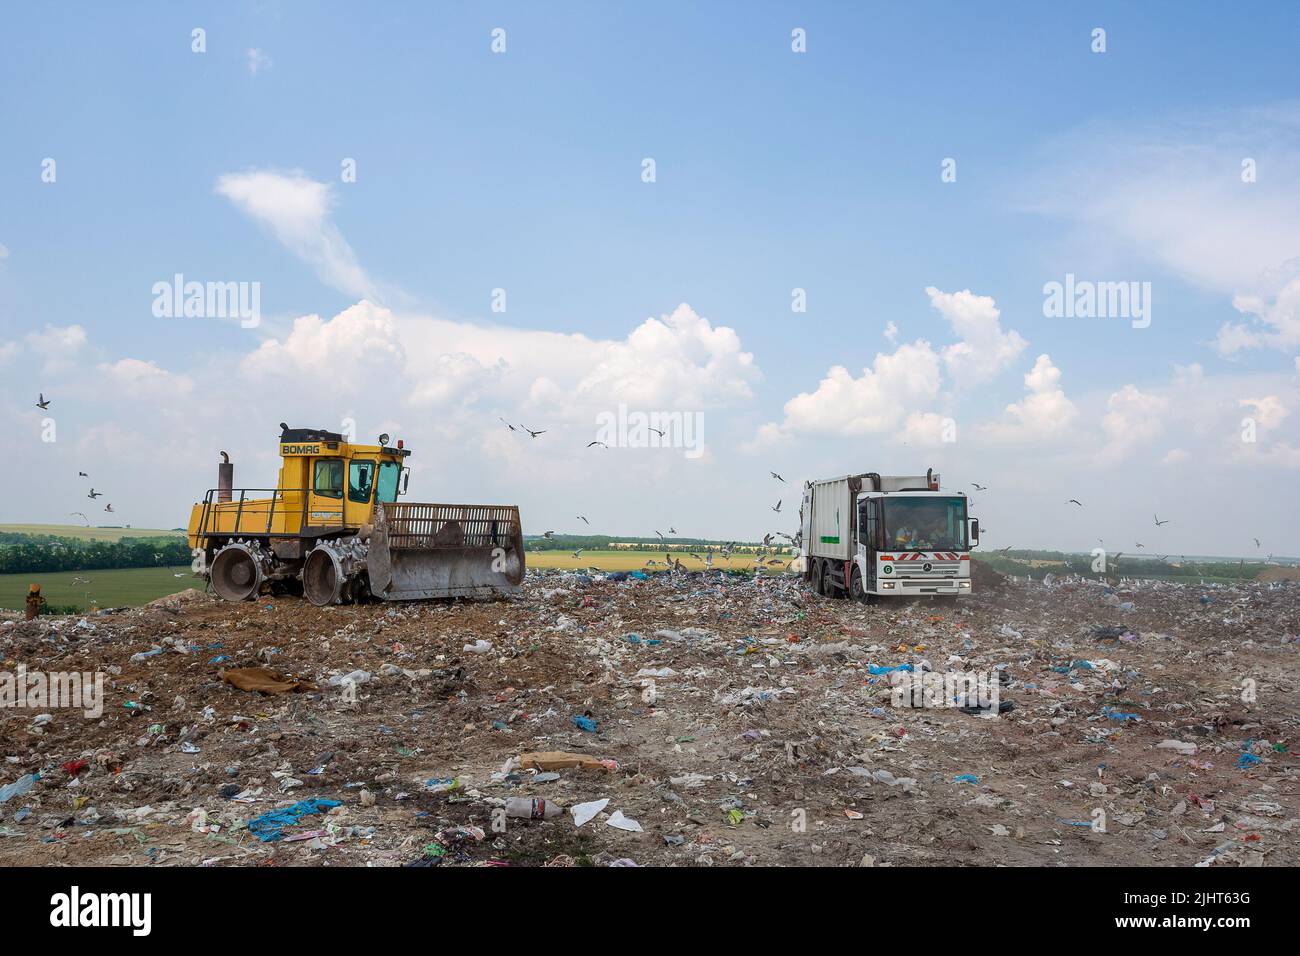 Waste management Landfill site Stock Photo